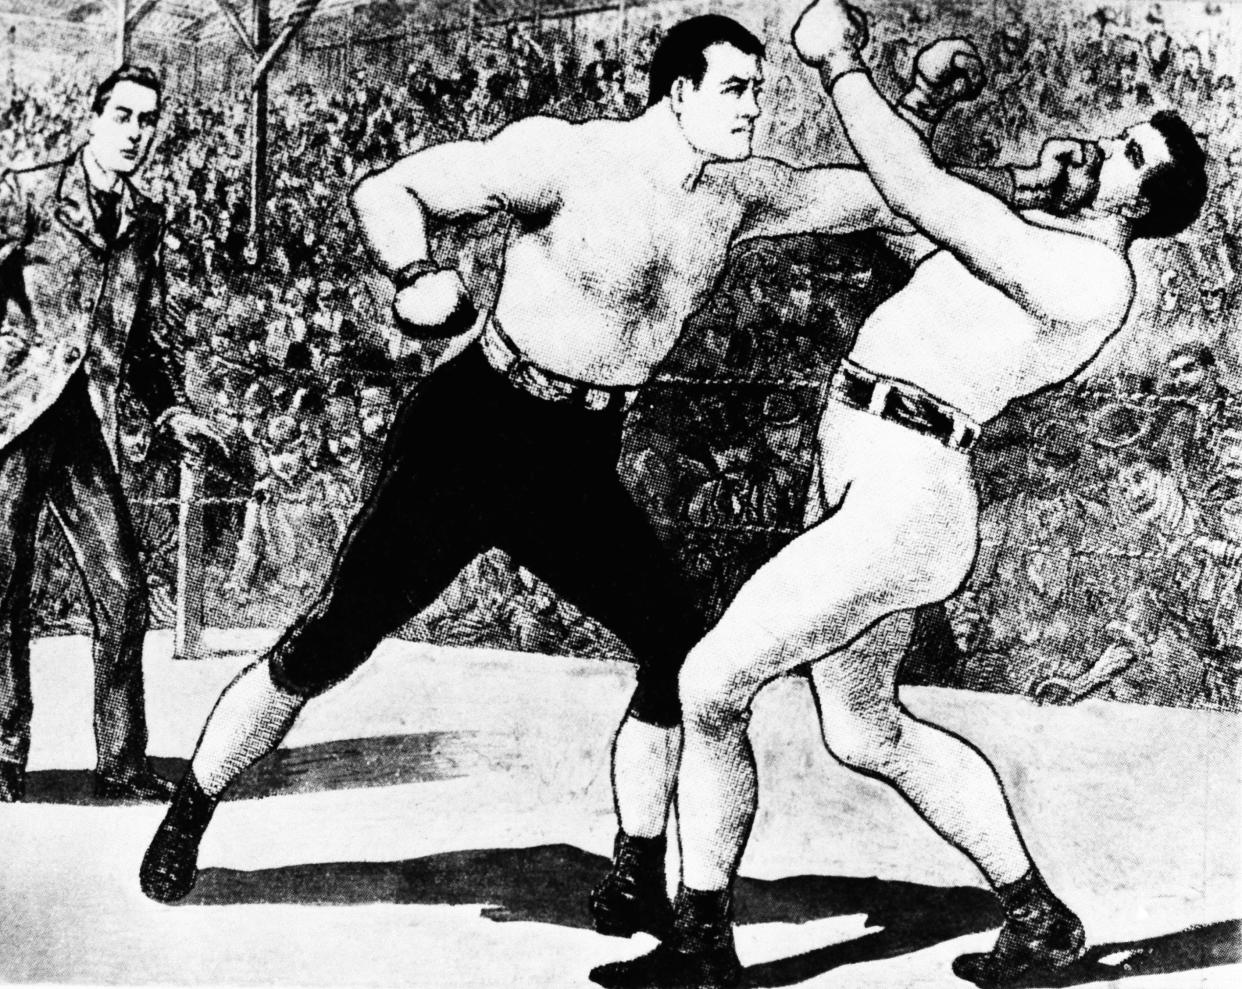 This drawing shows fight action between heavyweight Jim Corbett, left, and John L. Sullivan in New Orleans in 1892. Sullivan, champion for more than a decade, was defeated by Corbett in the first fight fought with padded gloves, $100 ringside seats and a purse of $25,000 with side bets of $10,000. (AP Photo)